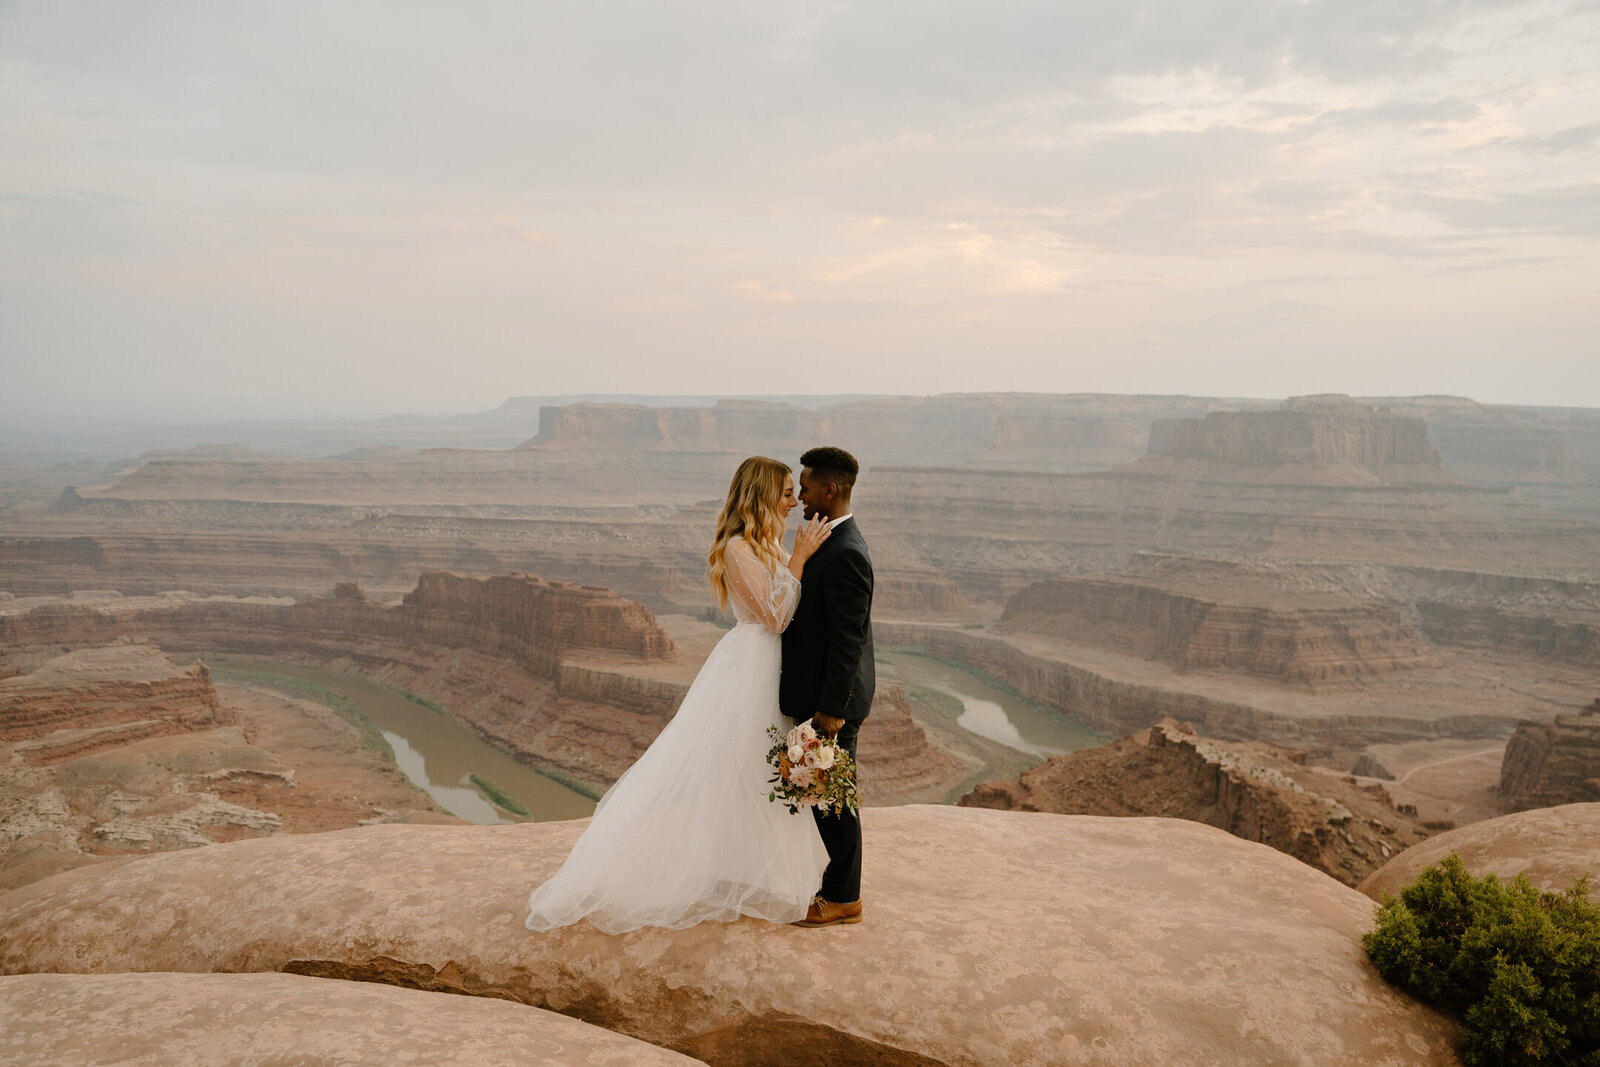 Sunset wedding at Dead Horse State Park in Moab, Utah of a beautiful mixed couple